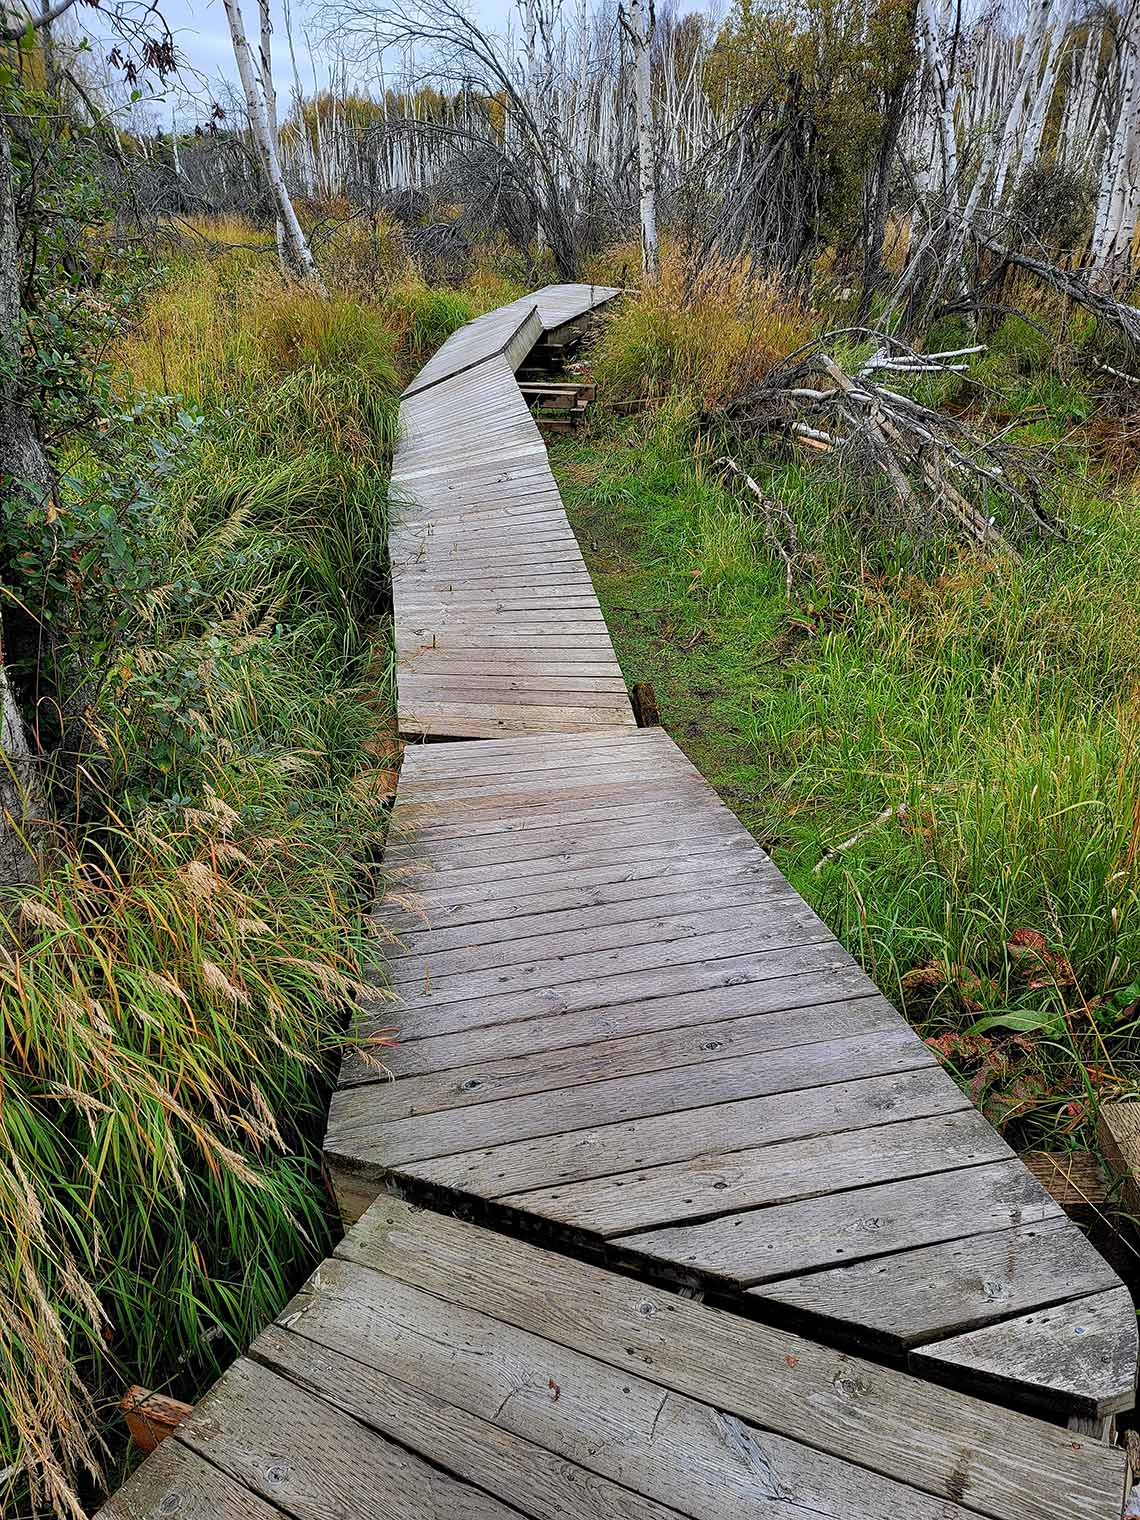 A boardwalk that has been damaged by melting permafrost